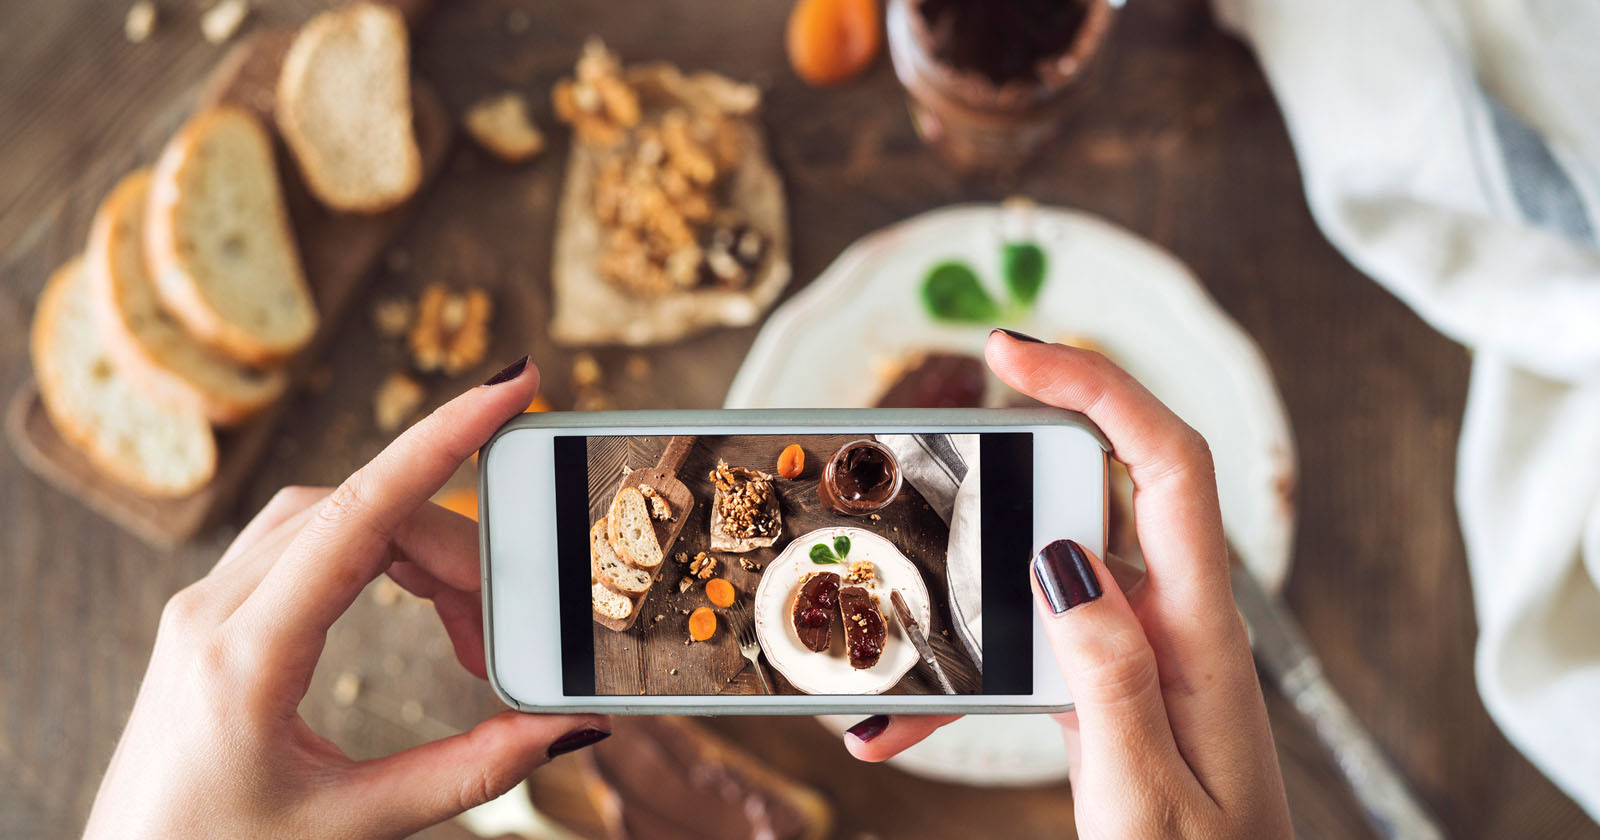 Hands holding a phone are seen taking a picture of food.